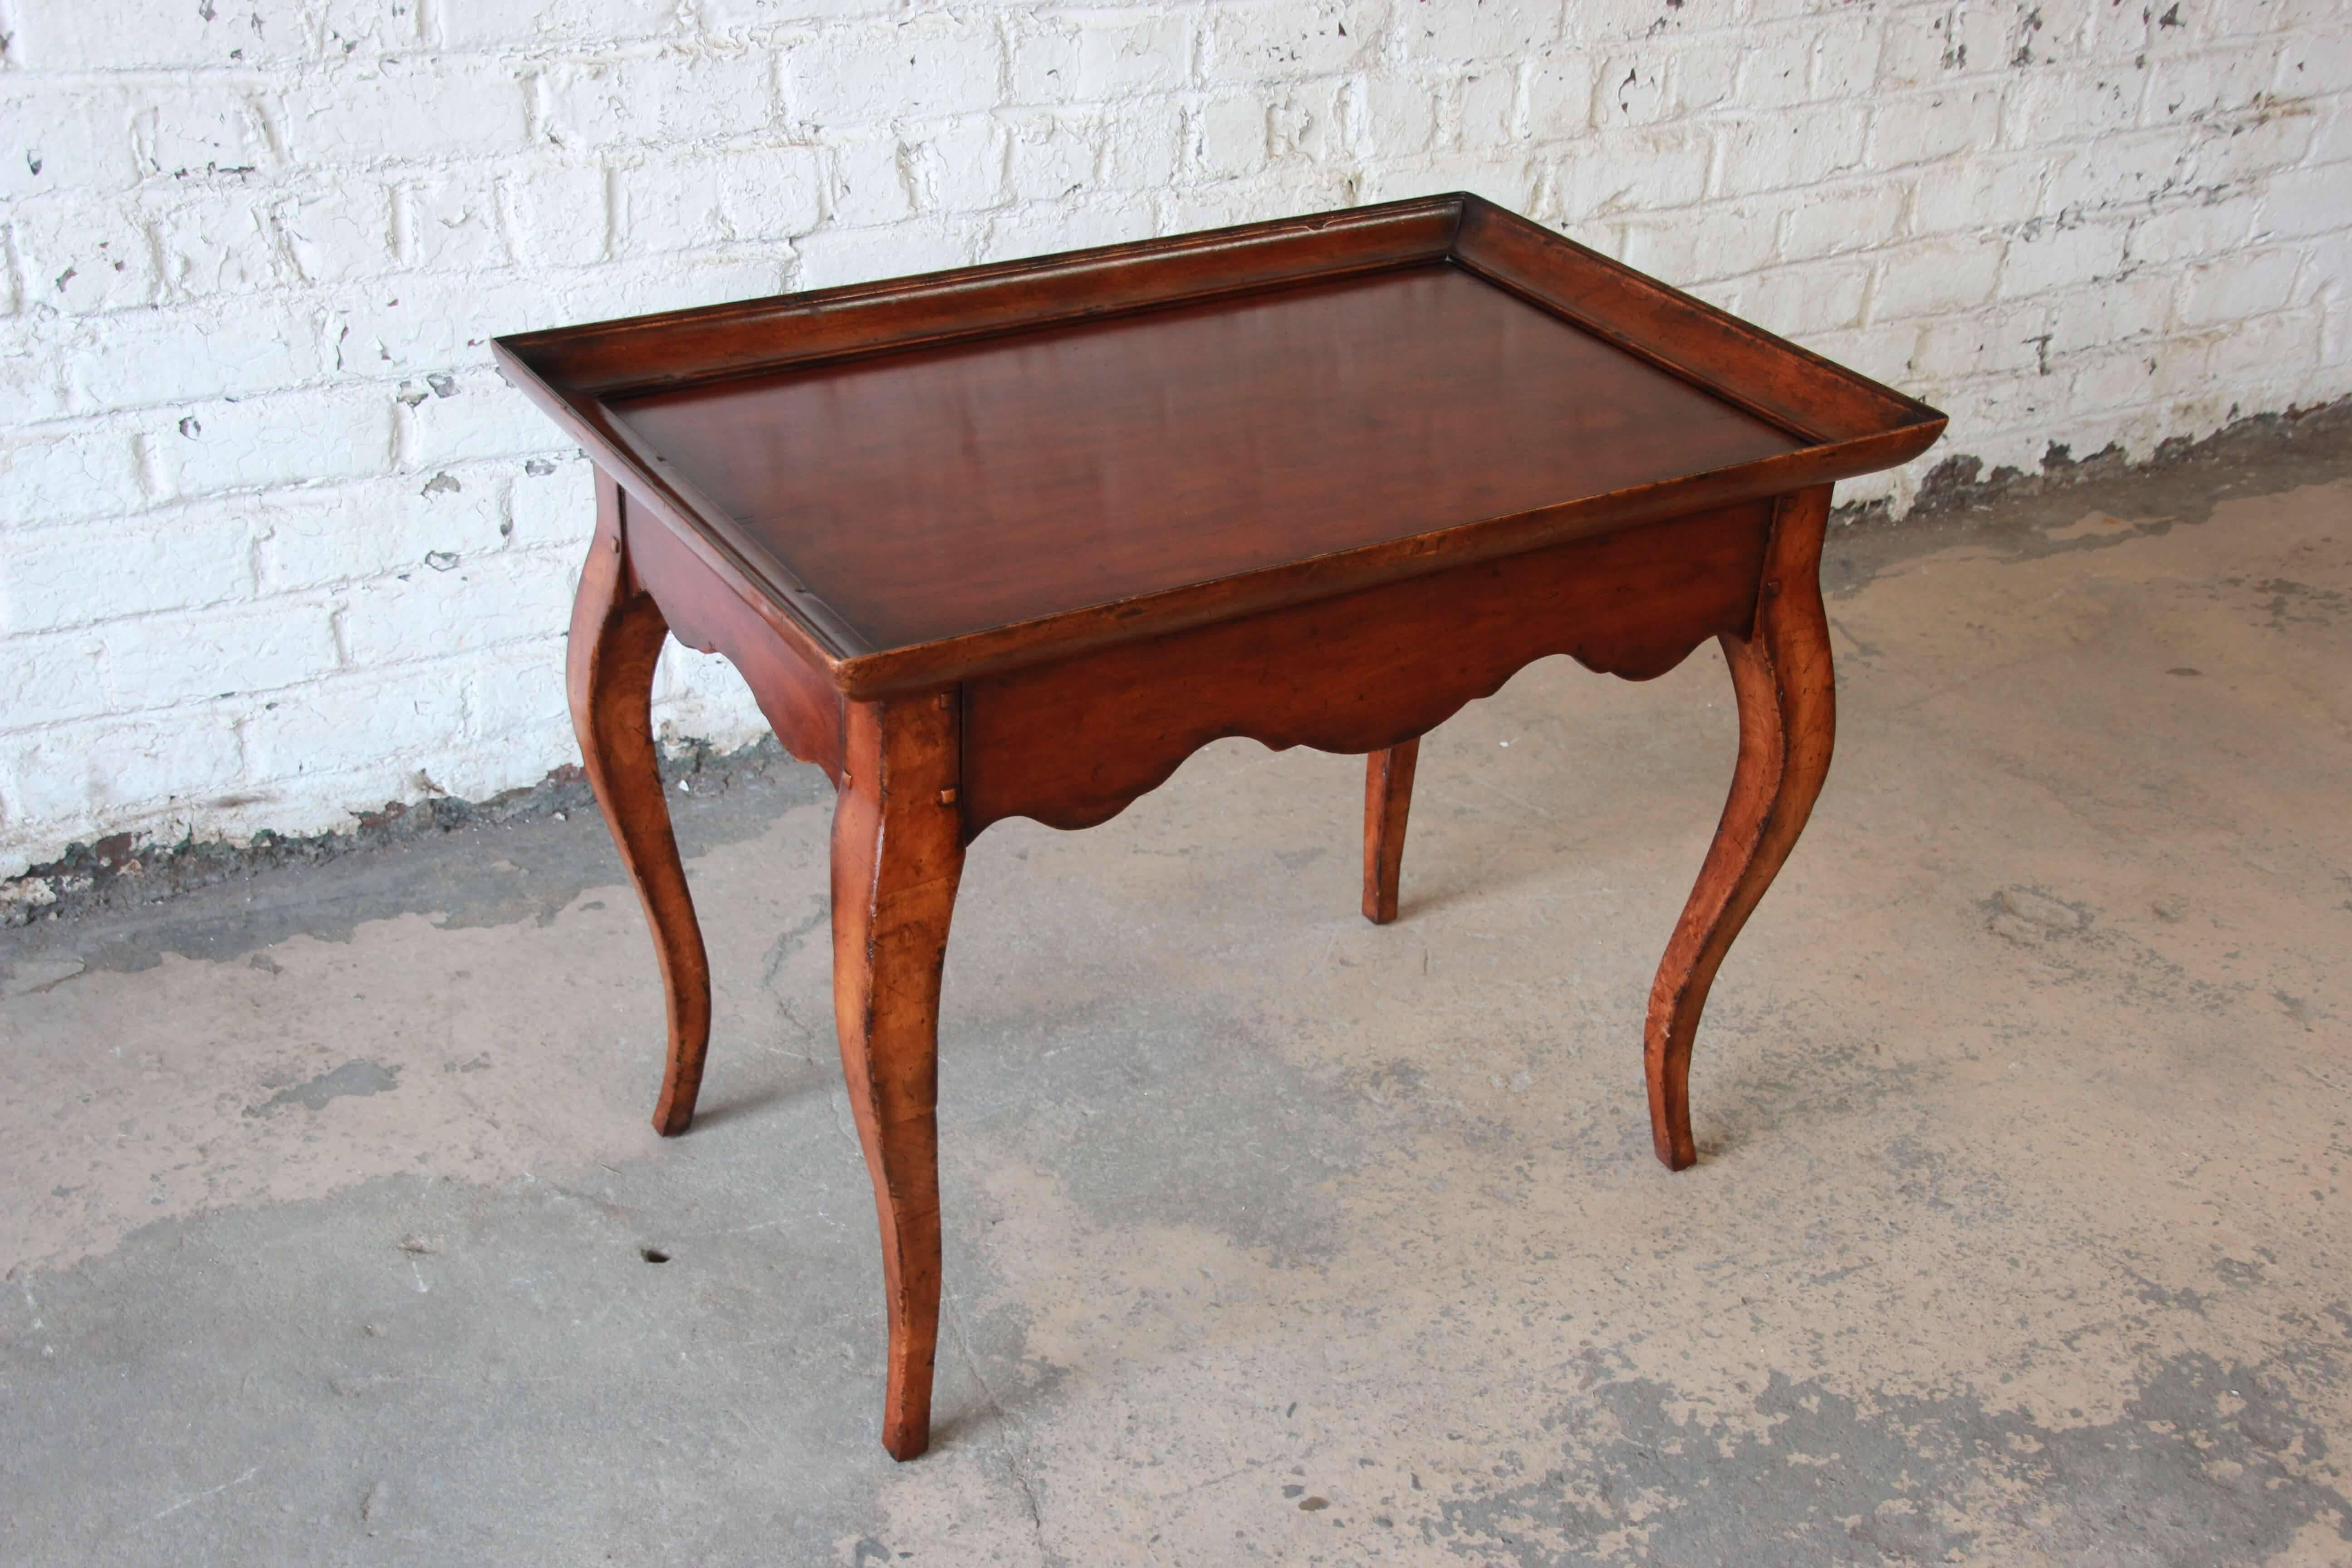 Offering a beautiful French side table by Ralph Lauren. The table has Provincial style legs and an antique design. The table is made from solid wood and has a nice sized surface with raised molded edging. Below there is a drawer for storage and